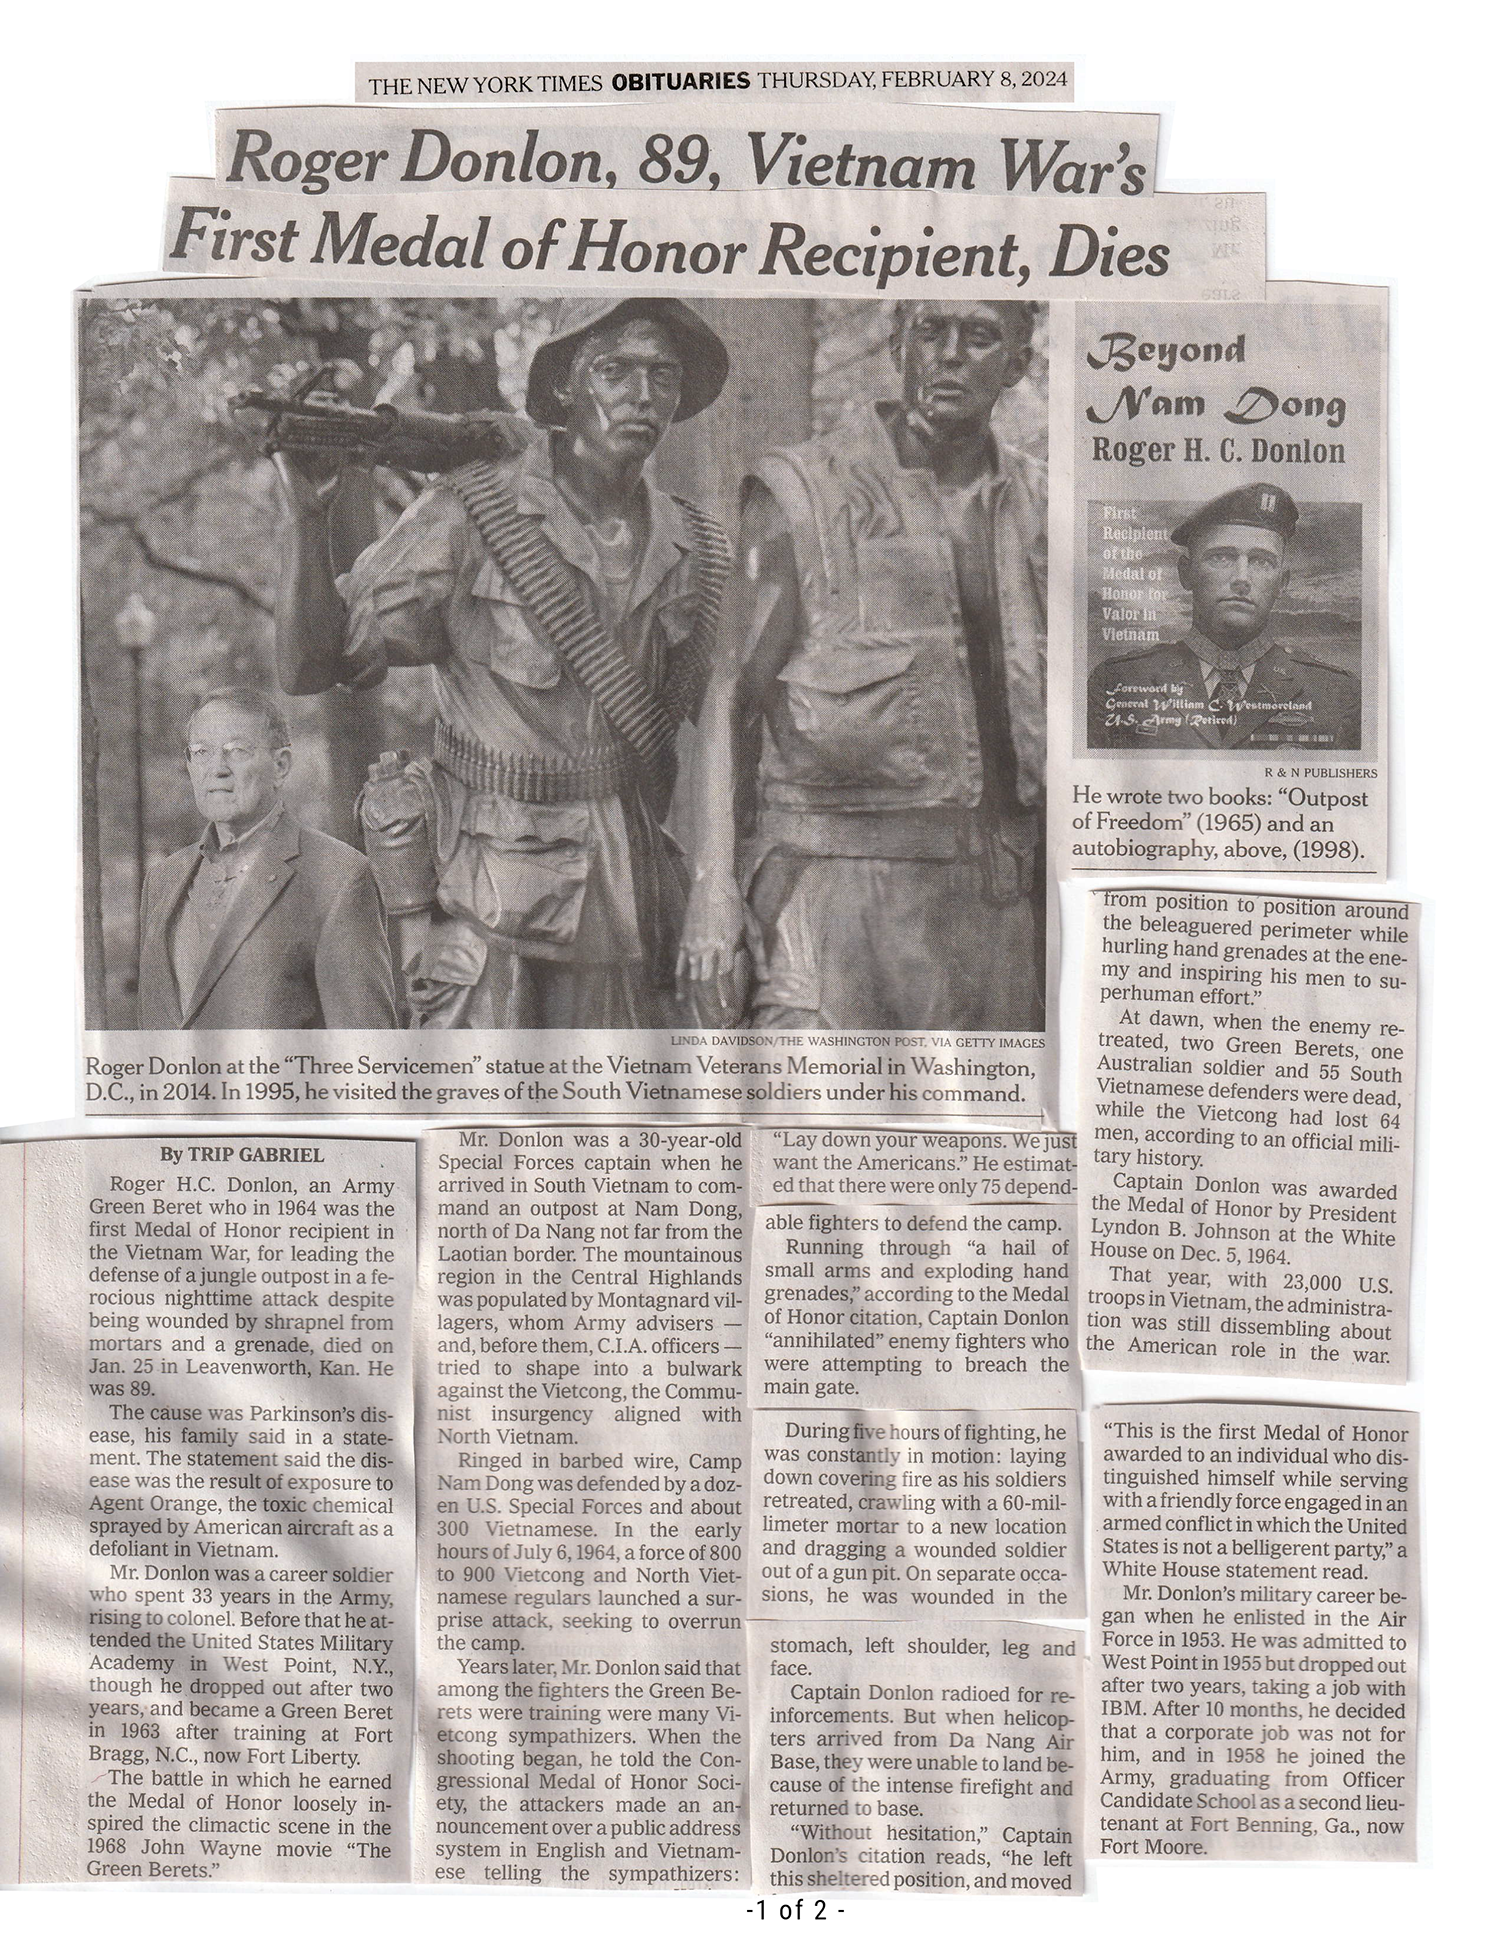 Page 1 of a 2 Page copy/paste of a NY Times obituary for Roger Donlon.